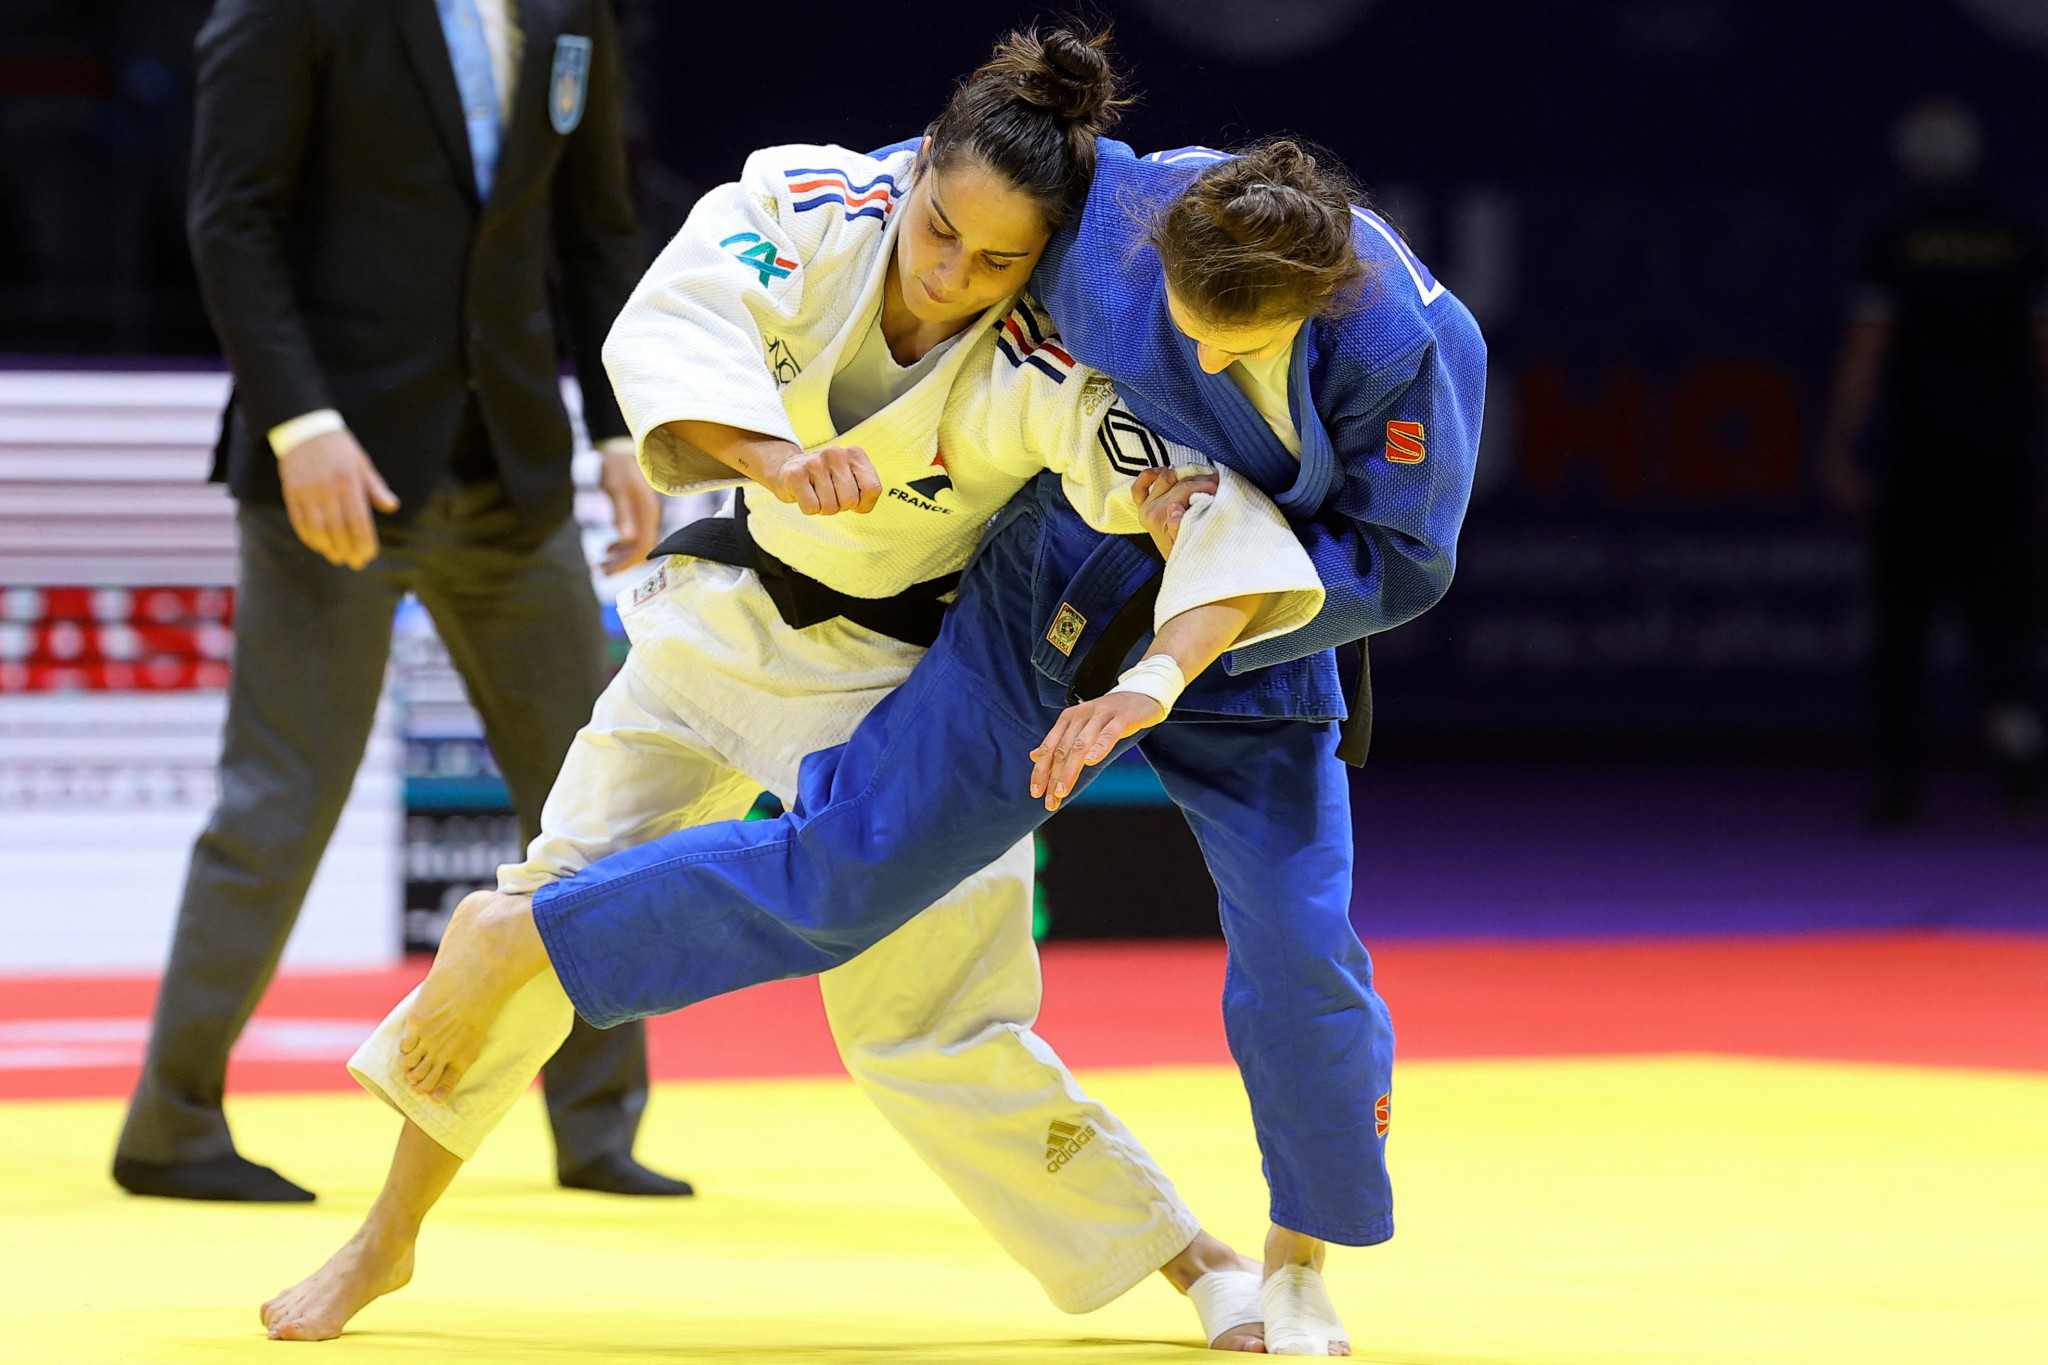 Sabina Giliazova become the first Russian judoka to compete under the individual neutral athlete banner but lost in the opening round ©Getty Images